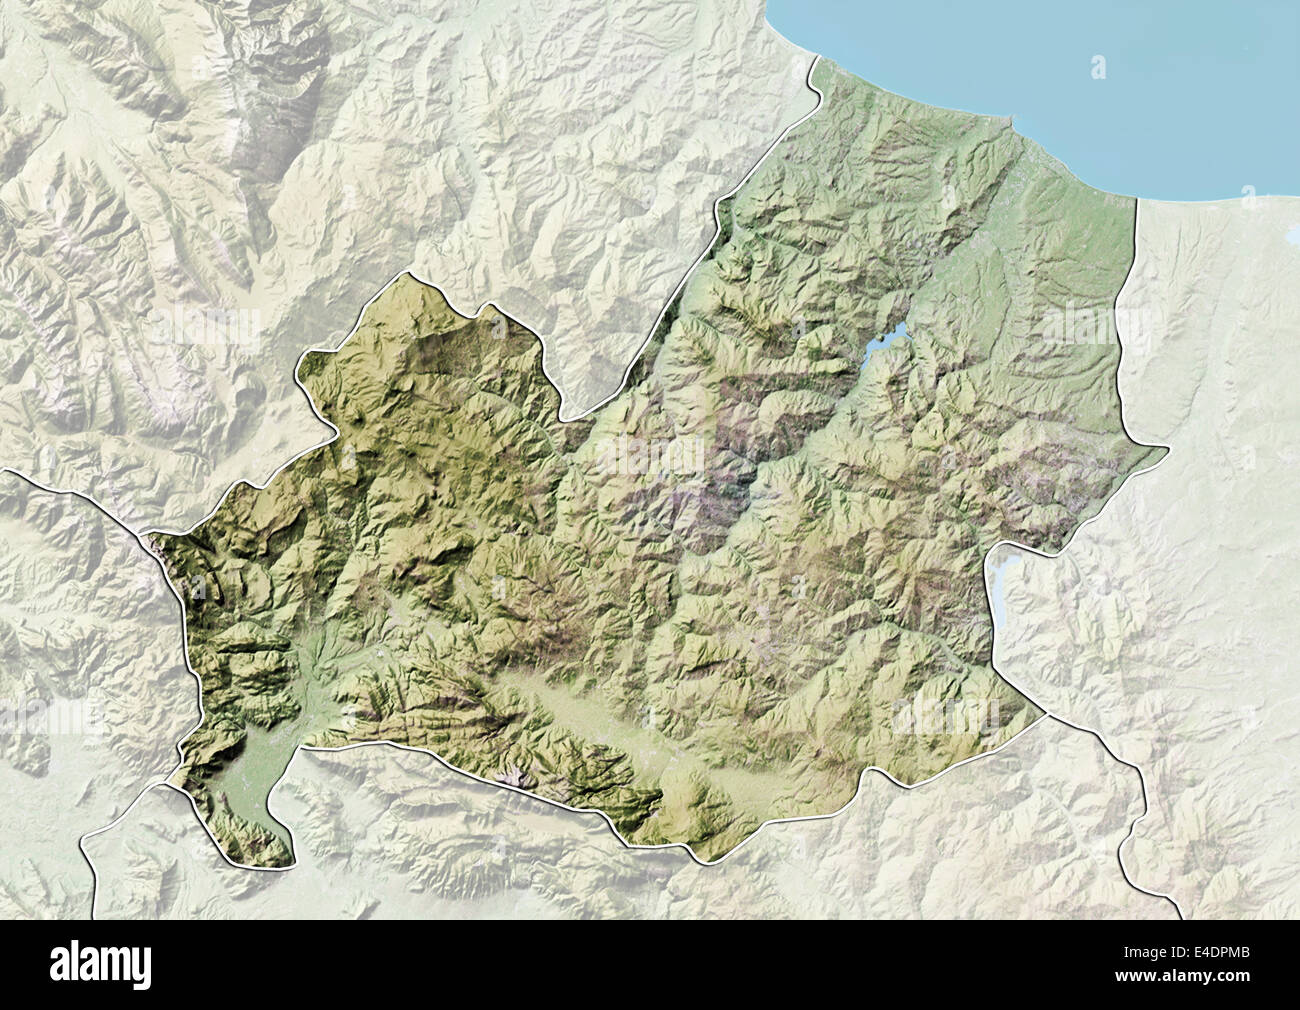 Region of Molise, Italy, Relief Map Stock Photo